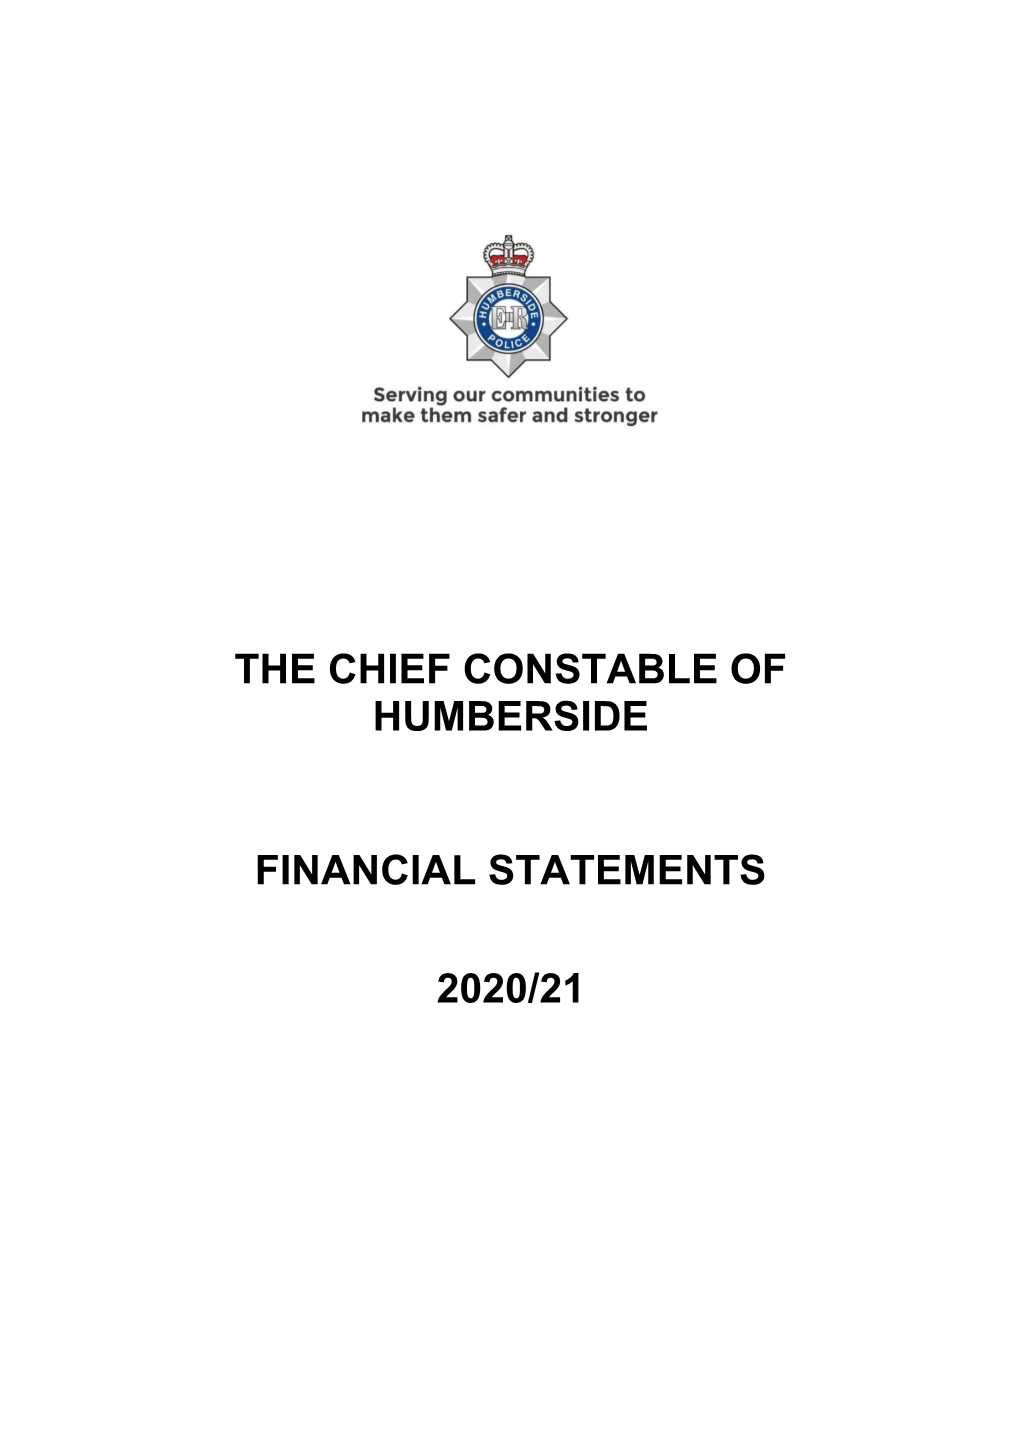 The Chief Constable of Humberside Financial Statements 2020/21